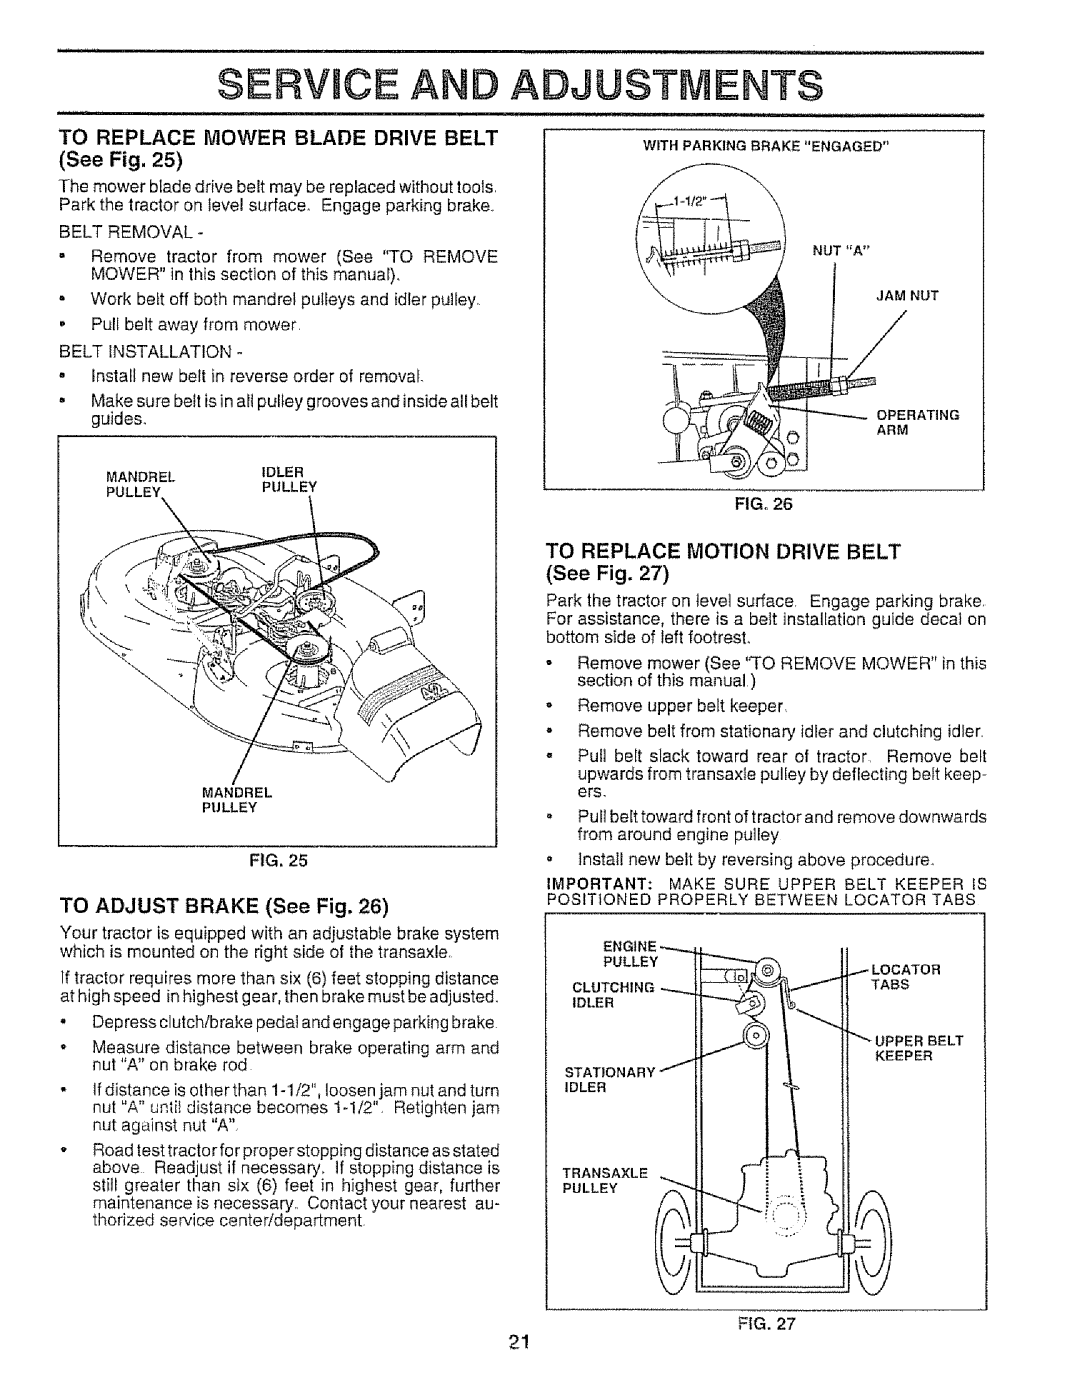 Sears 917.257651 owner manual Service An, Adjustments, TO REPLACE MOWER BLADE DRIVE BELT See Fig, TO ADJUST BRAKE See Fig 